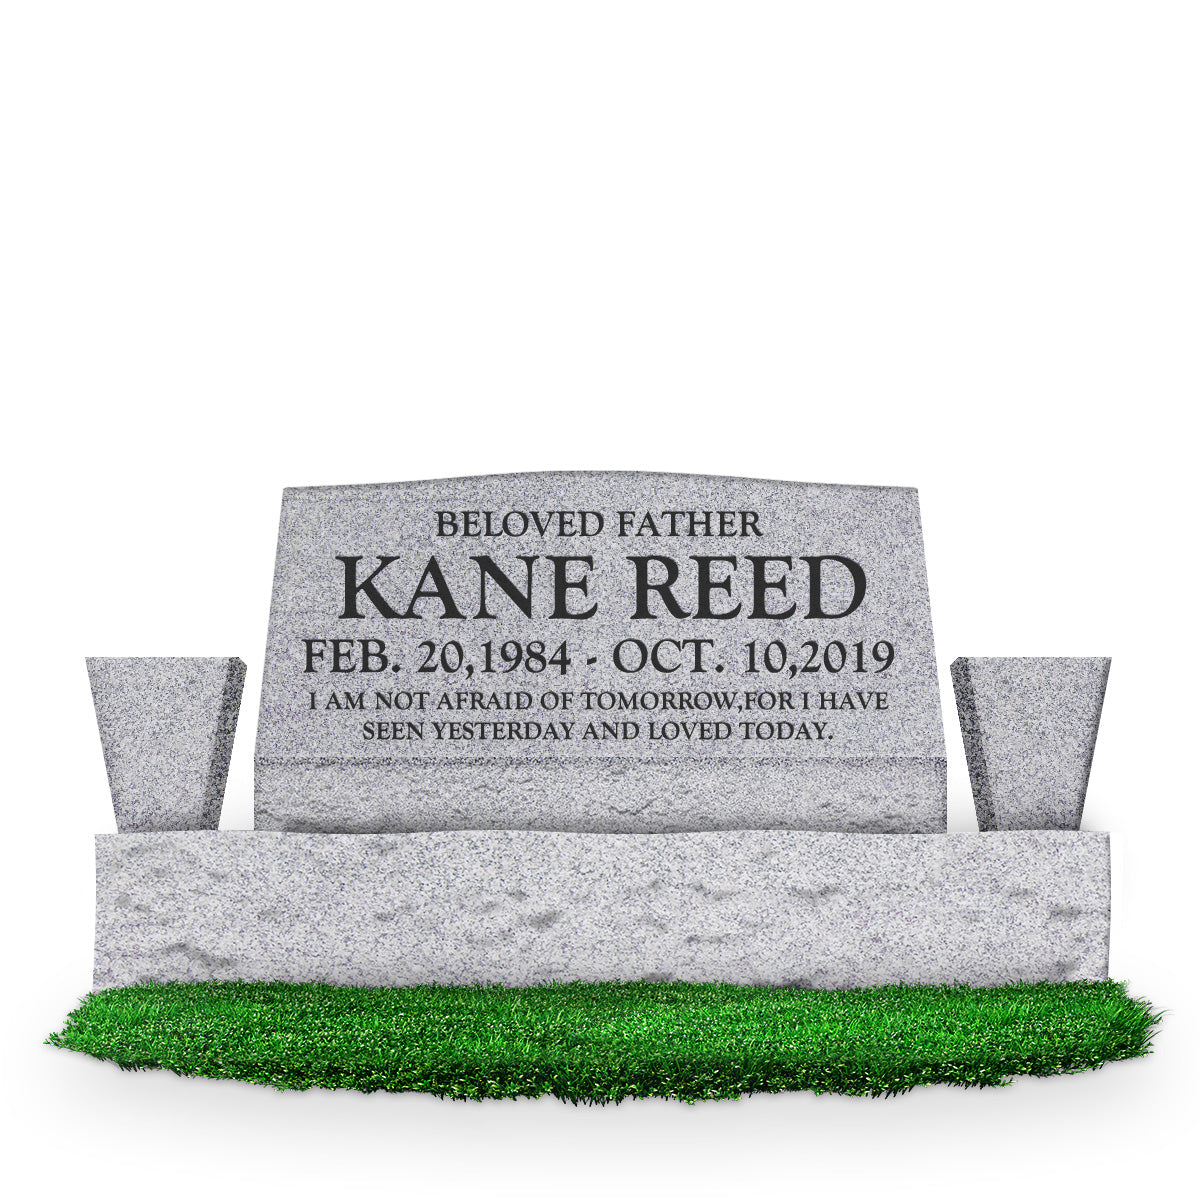 36″ x 10″ x 16″ Serp Top Slant Headstone: polished front and back; 52″ base; two square tapered vases; Single/Text